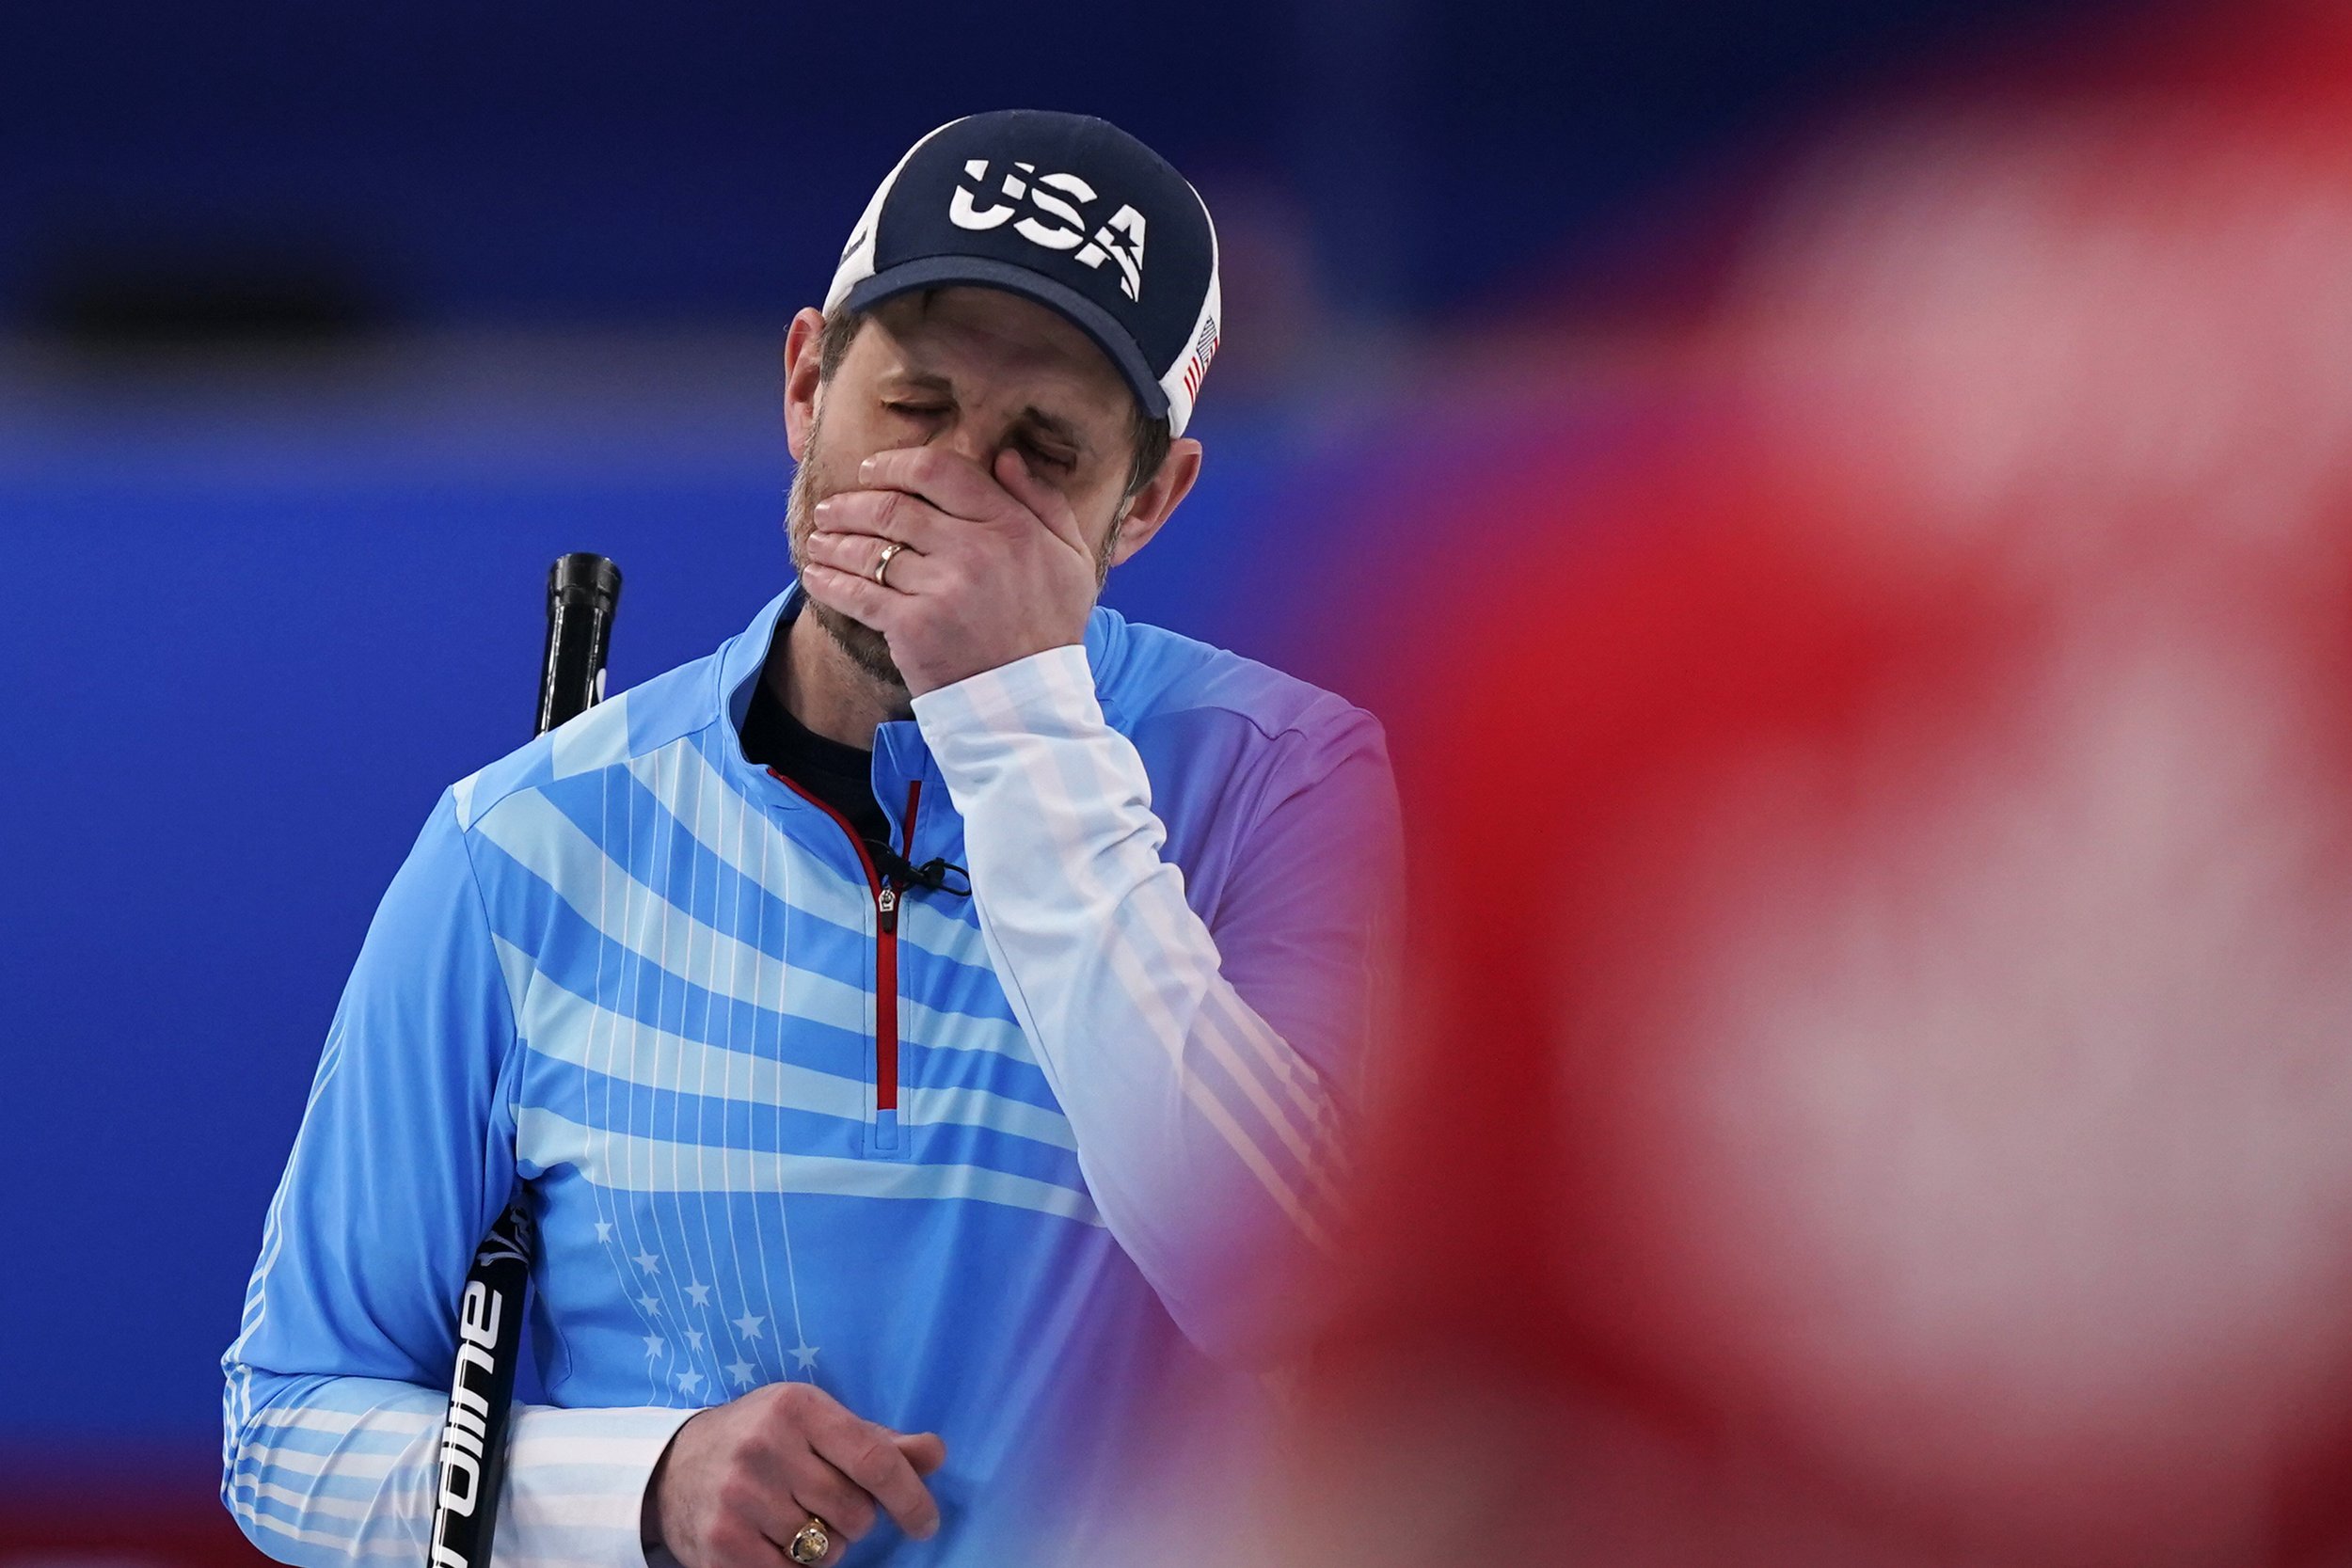  United States' John Shuster reacts after a bad throw during the men's curling bronze medal match between Canada and the United States at the Beijing Winter Olympics Friday, Feb. 18, 2022, in Beijing. (AP Photo/Brynn Anderson) 